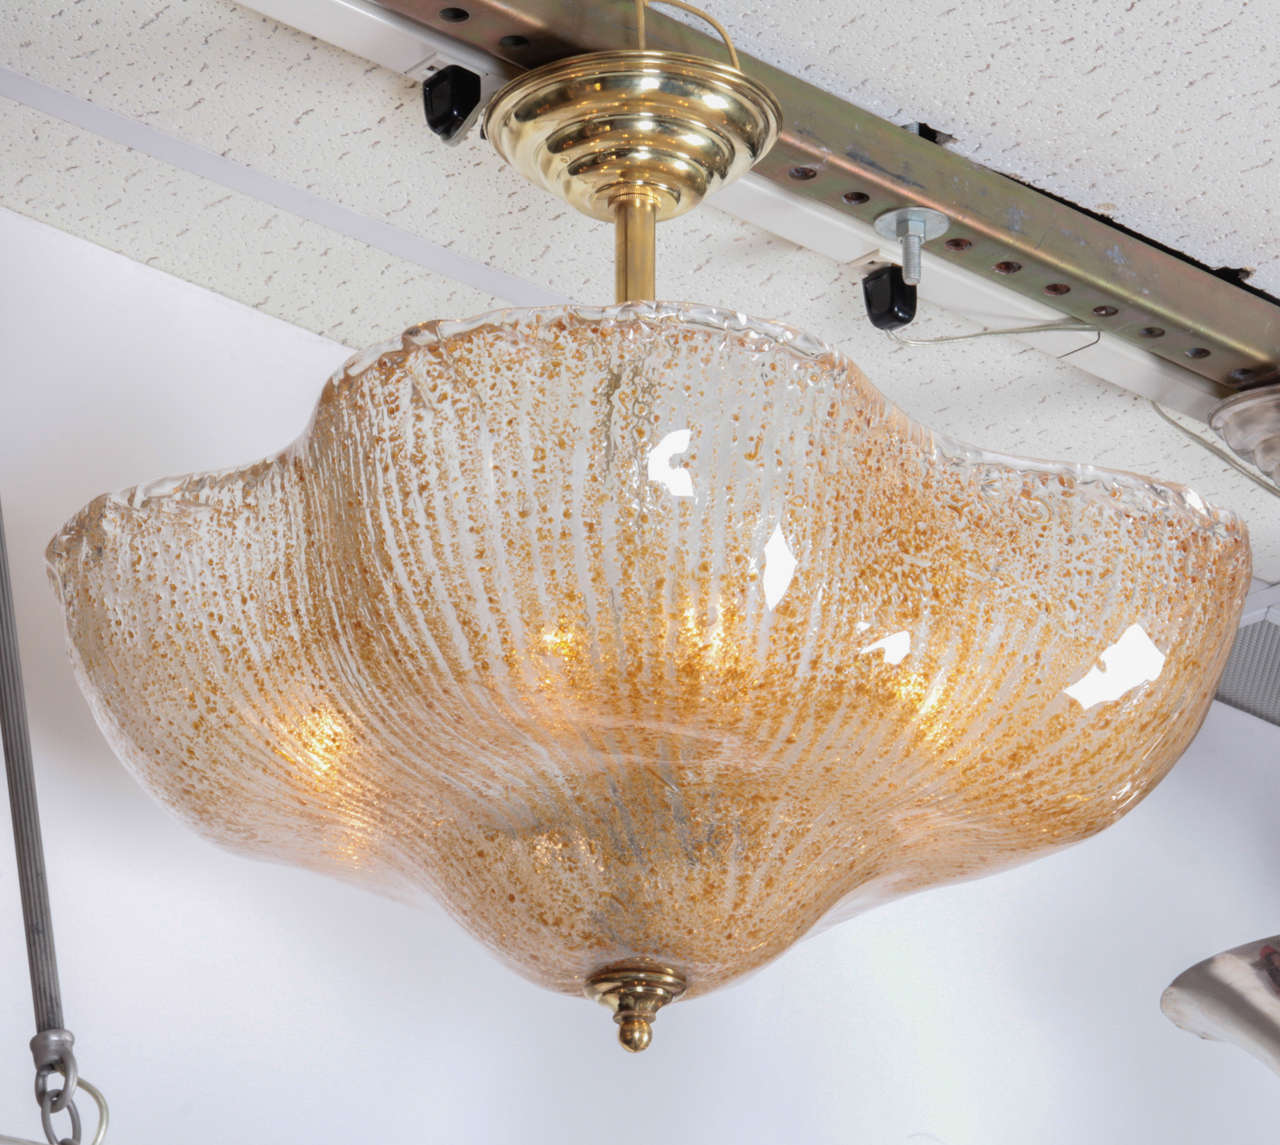 Italian, Mid century modern golden honey tinted, hand blown glass chandelier. 
Striated Rugiadoso, sand like interior creates a finely textured surface on an amorphous shape glass coupe supported by a brass central pole and canopy.
This coupe